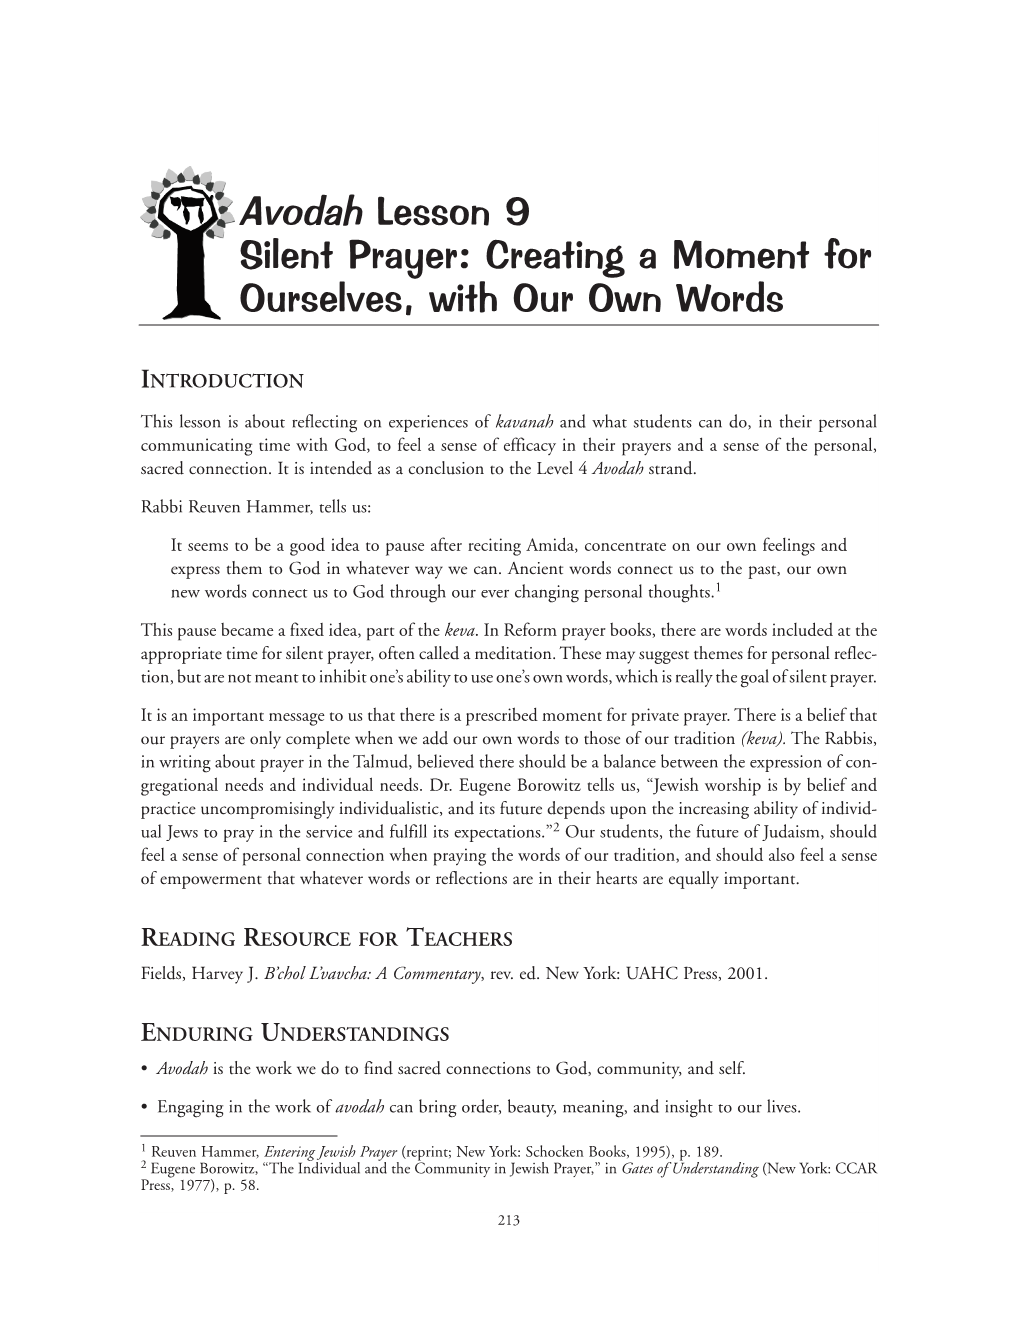 Avodah Lesson 9 Silent Prayer: Creating a Moment for Ourselves, with Our Own Words